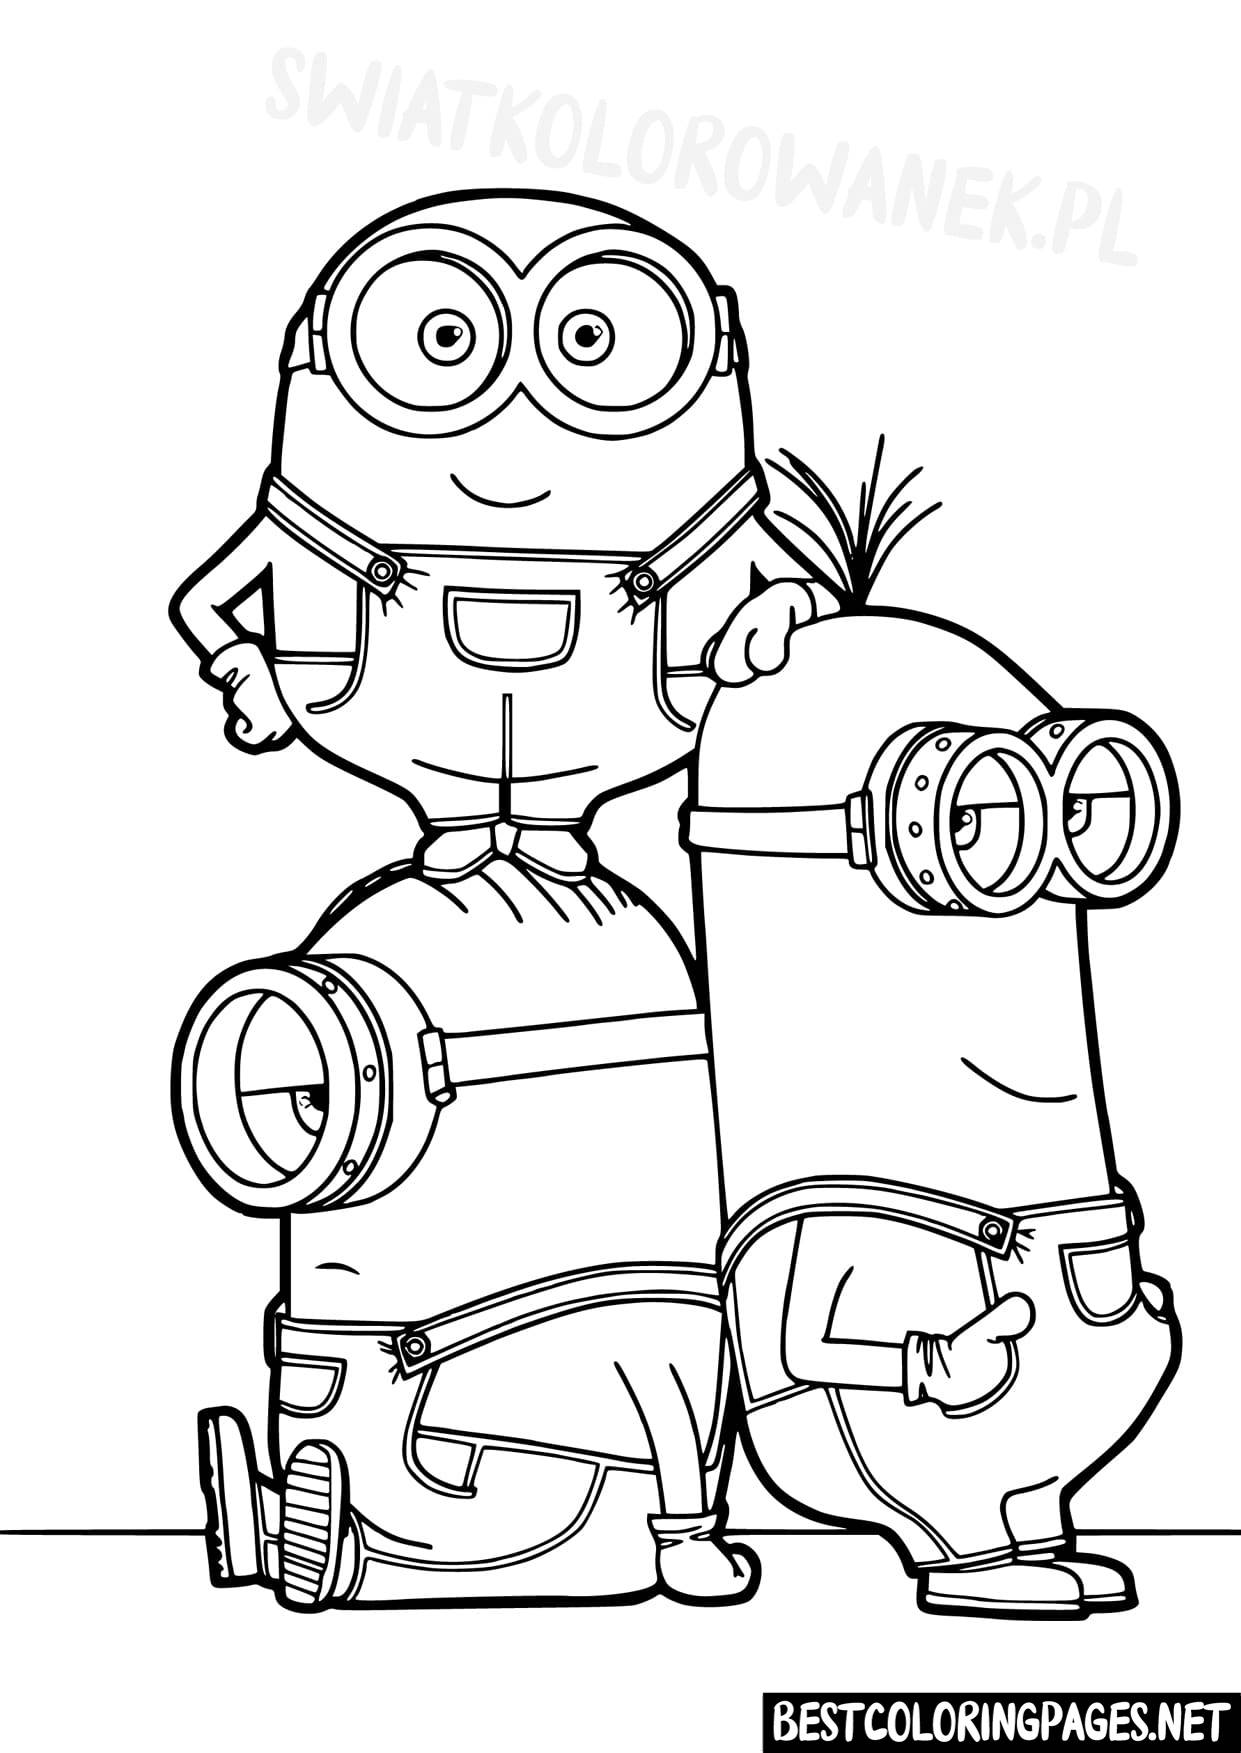 Minions coloring pages